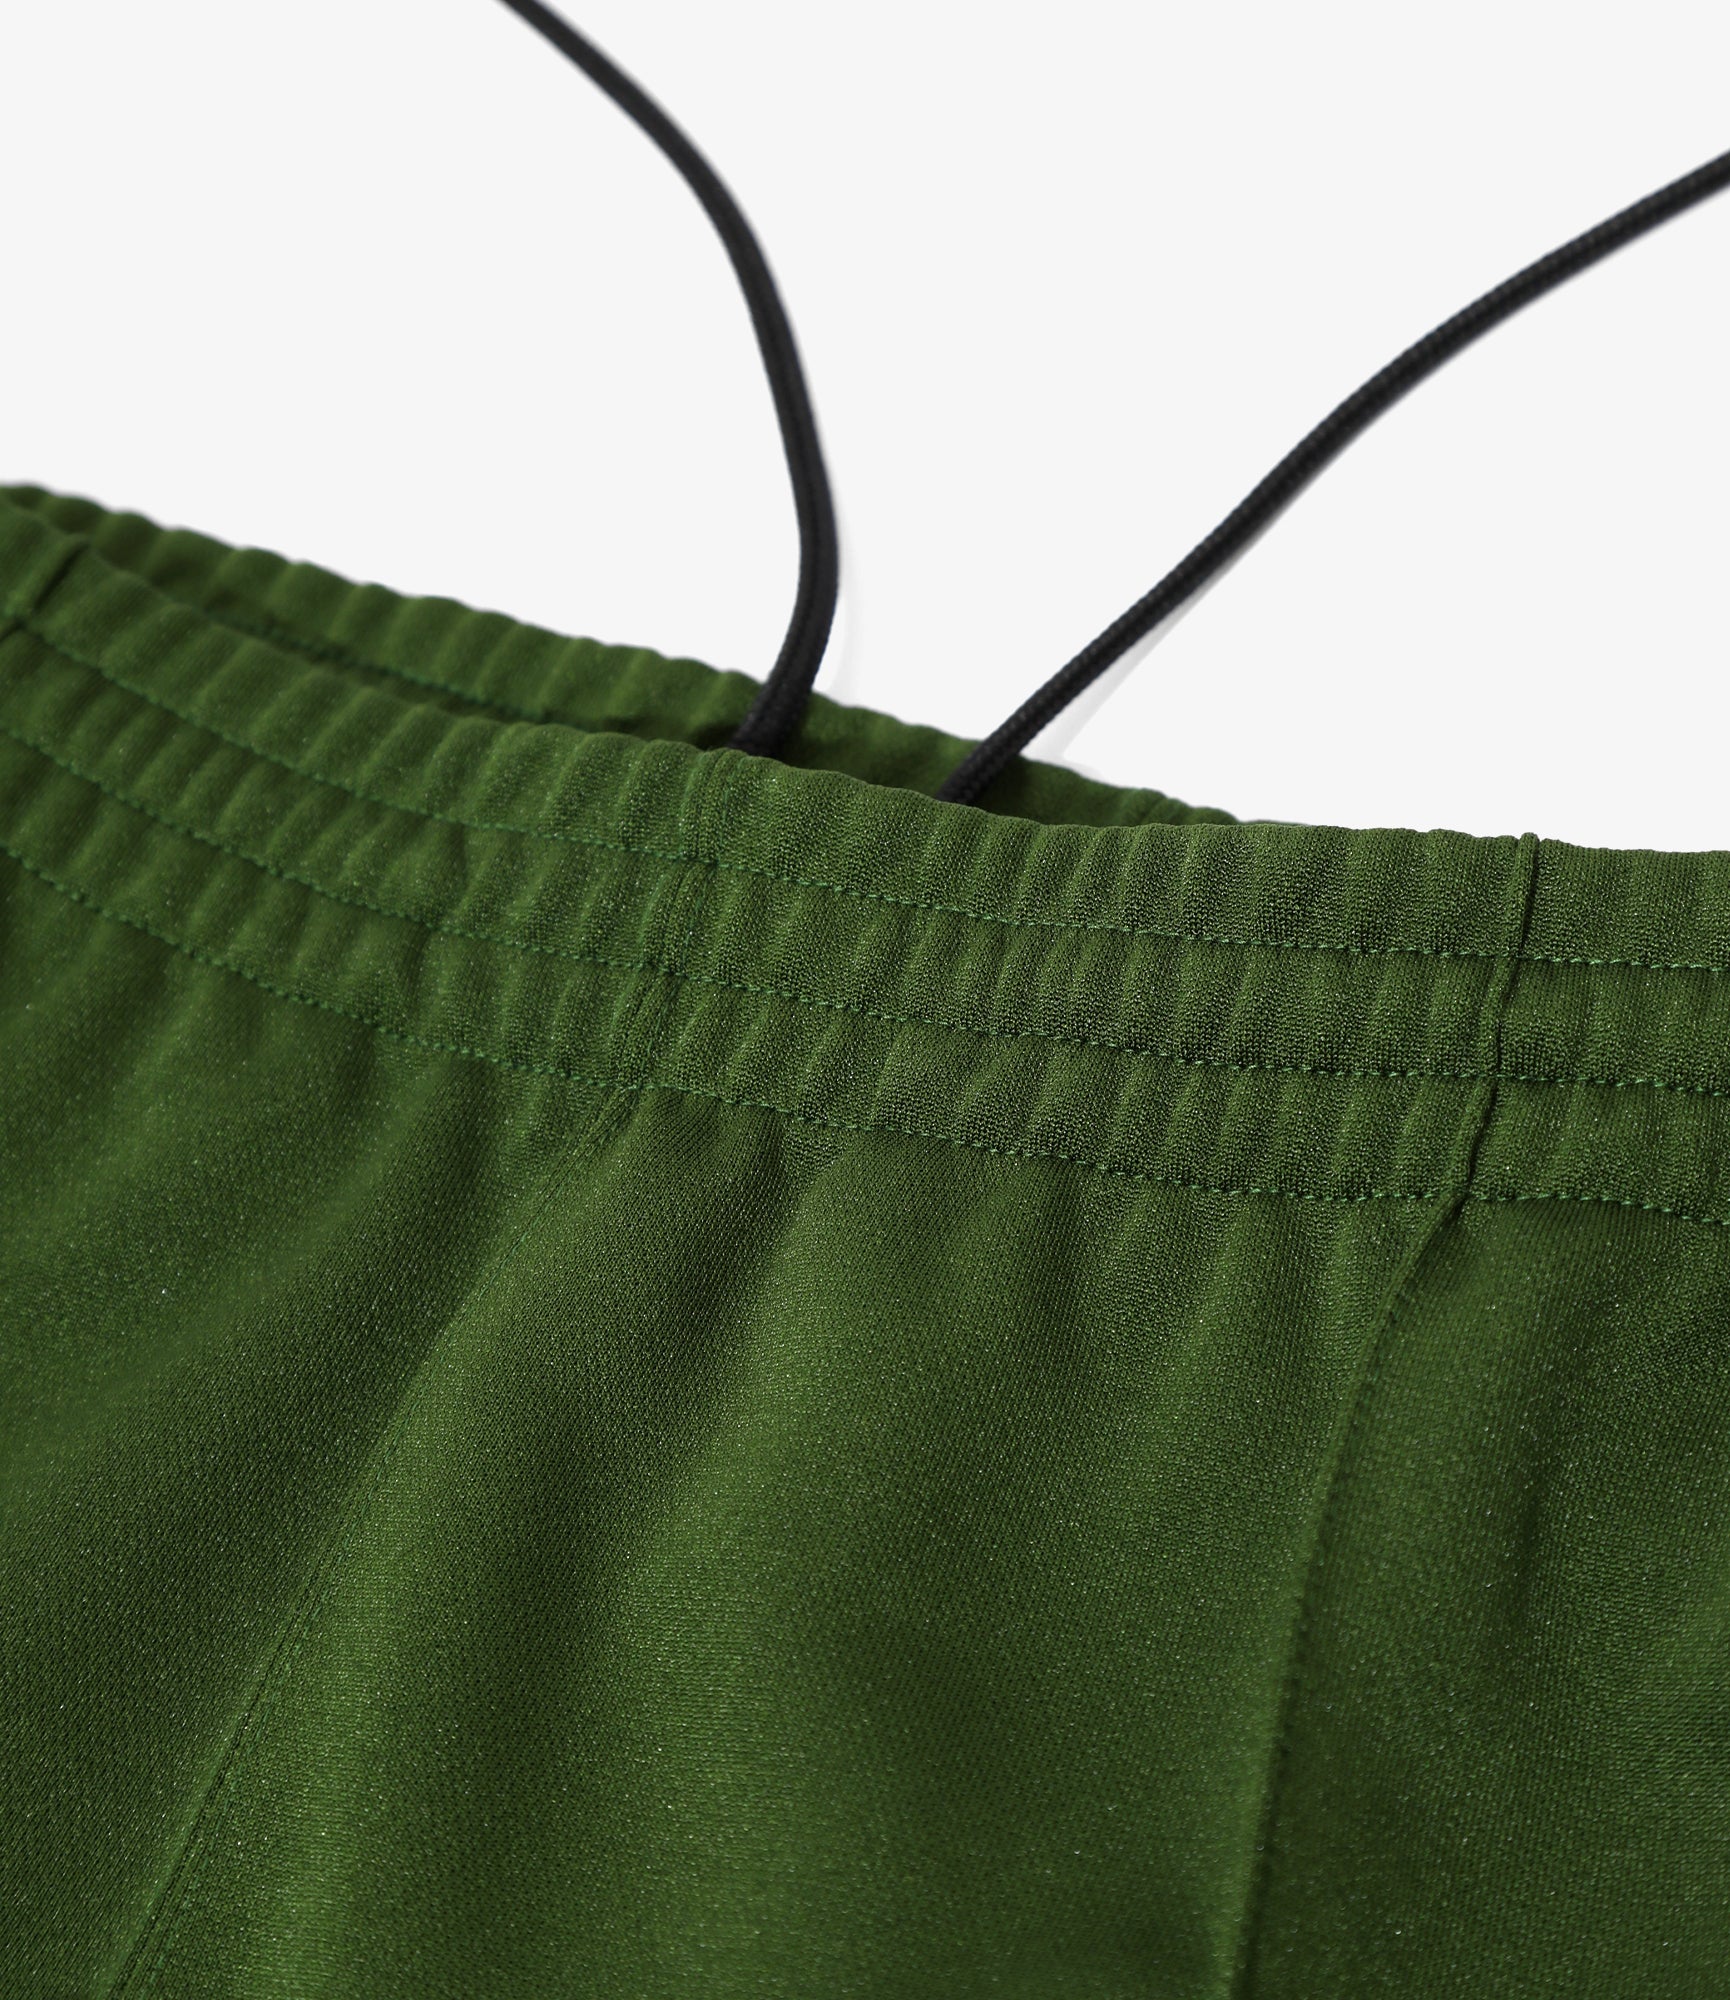 Boot-Cut Track Pant- Ivy Green - Poly Smooth